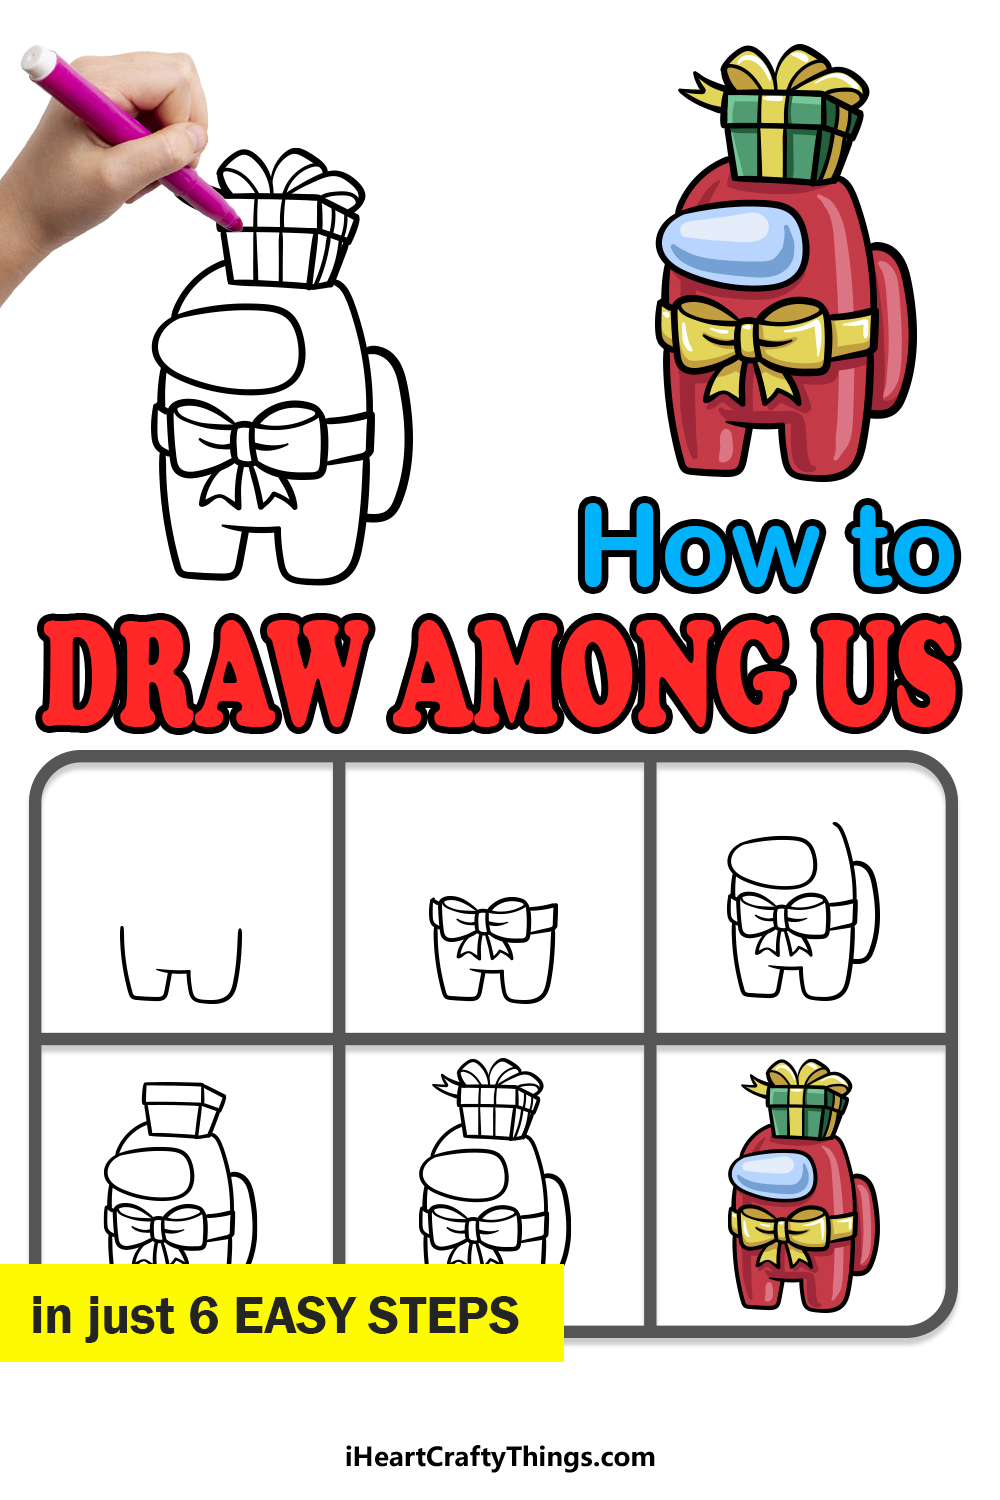 how to draw Among Us in 6 easy steps